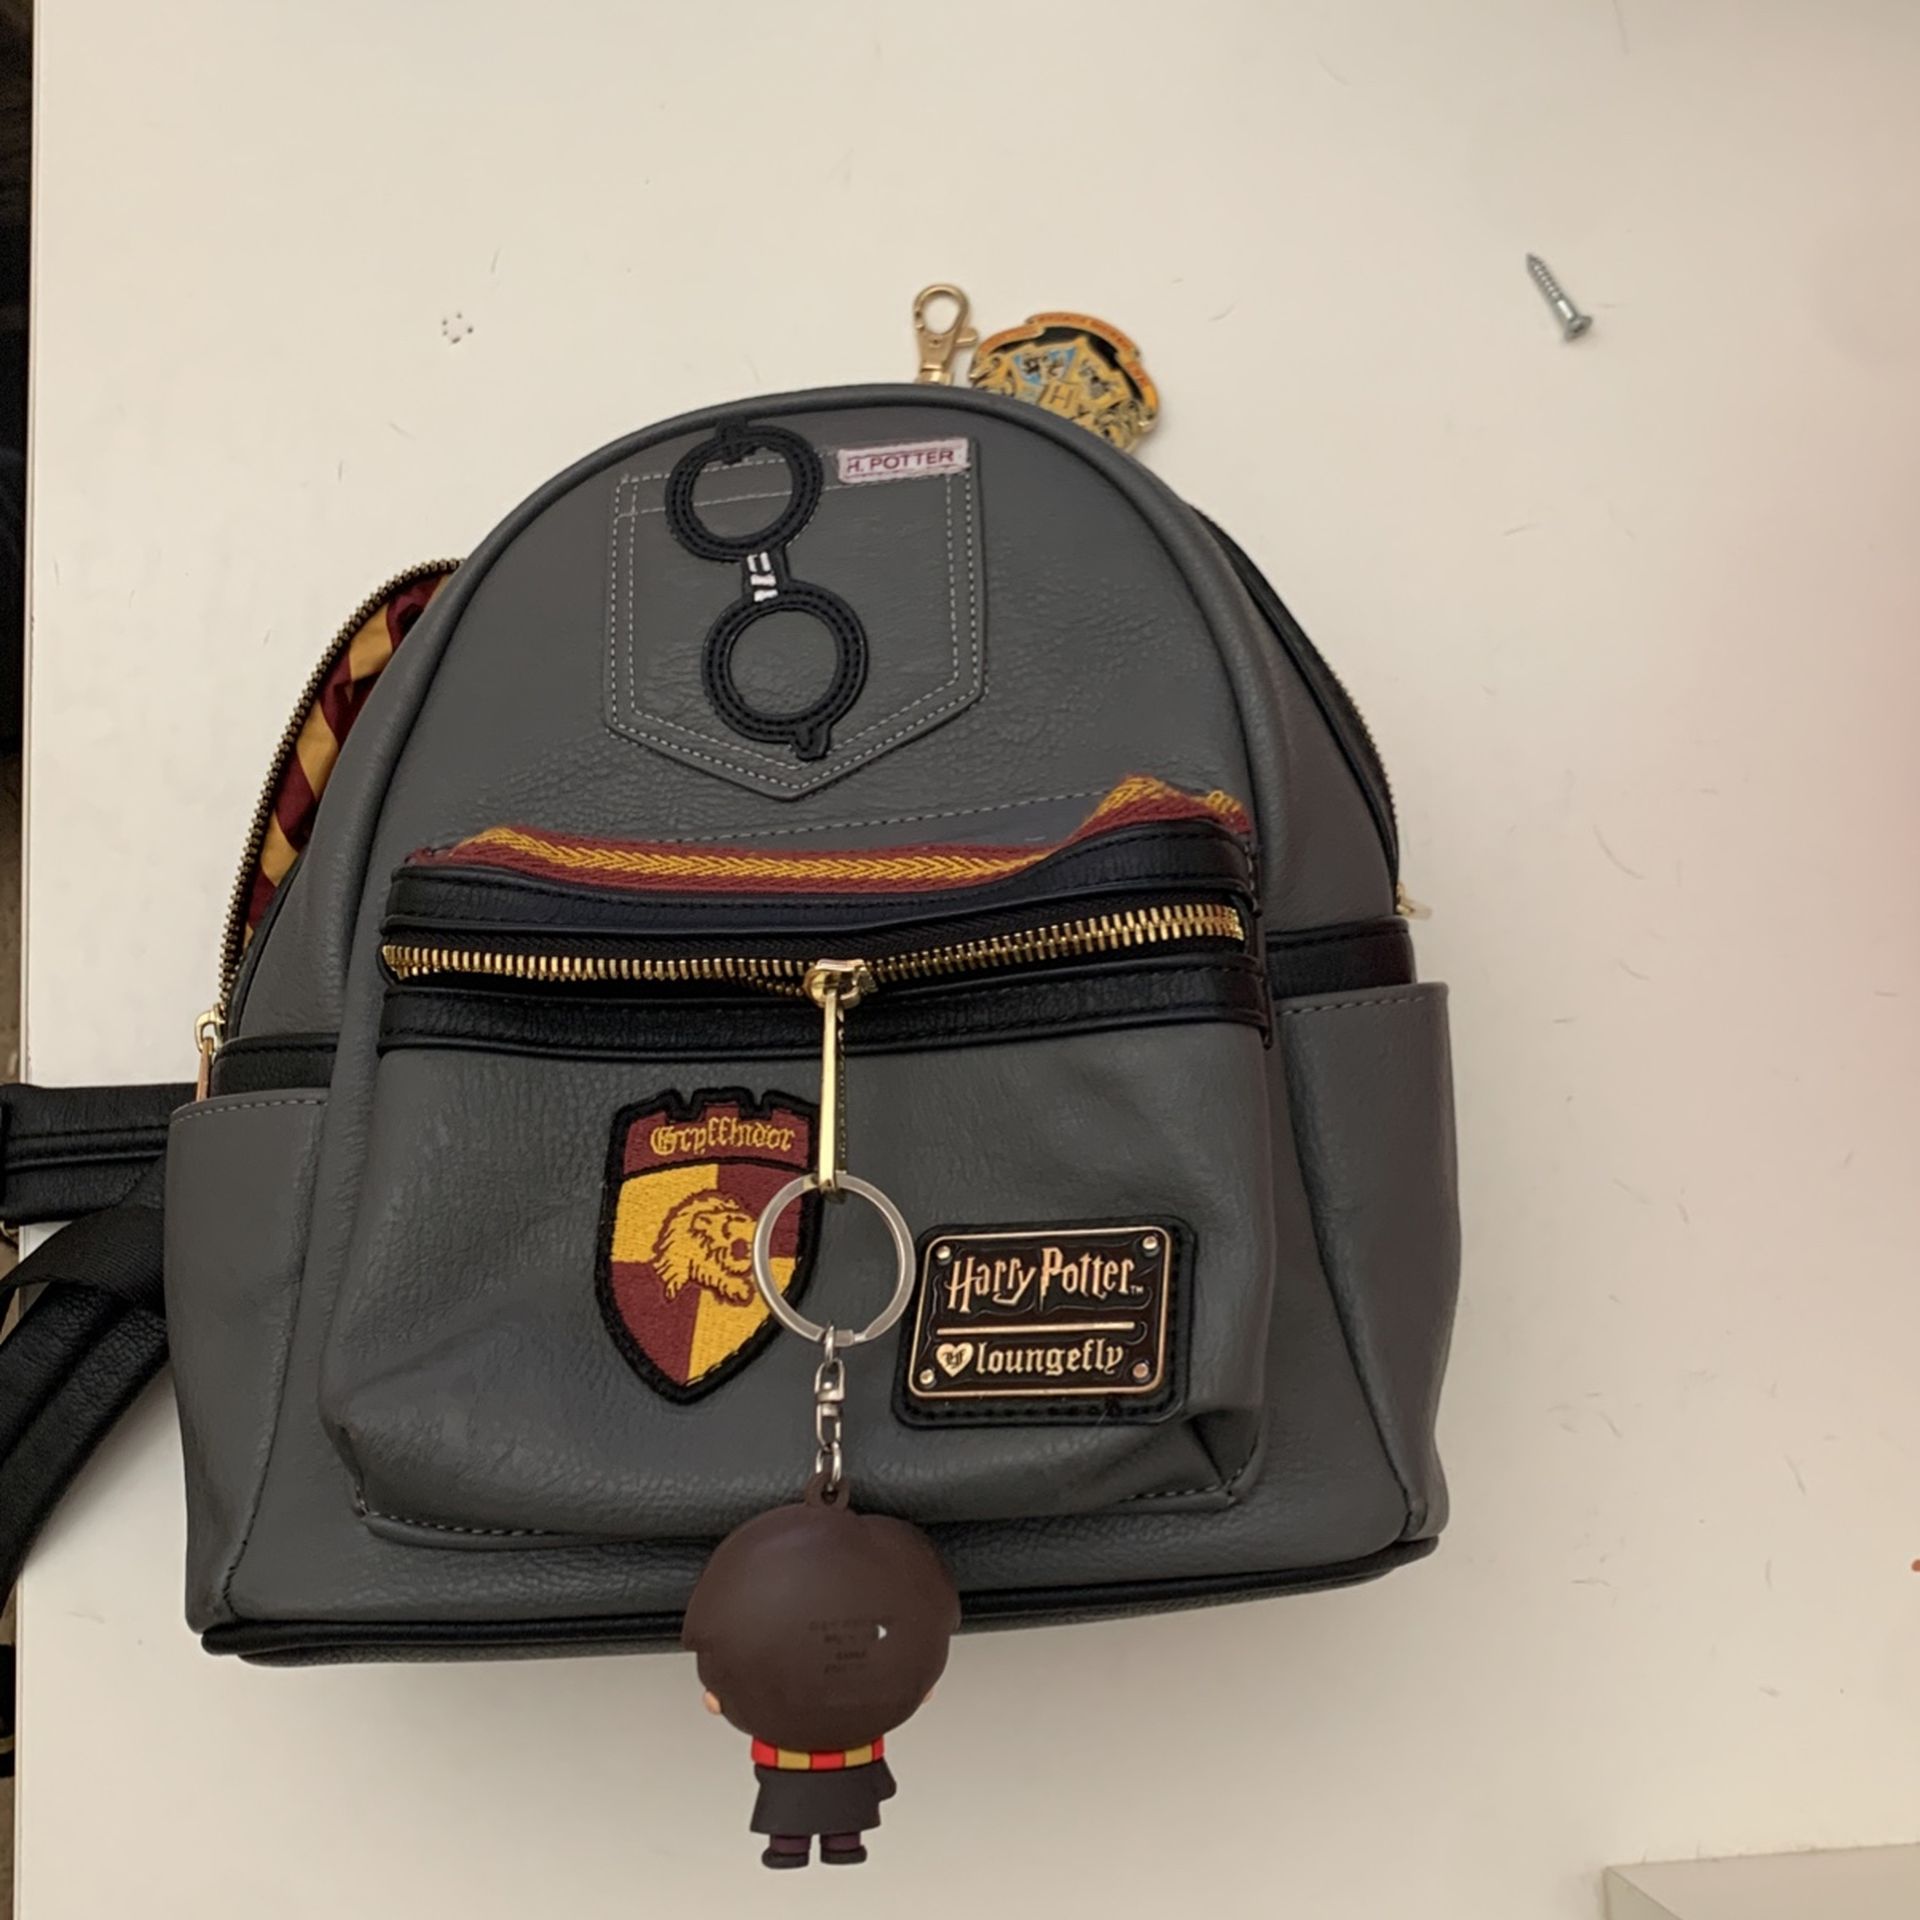  Harry Potter Loungefly Brand Small Bag